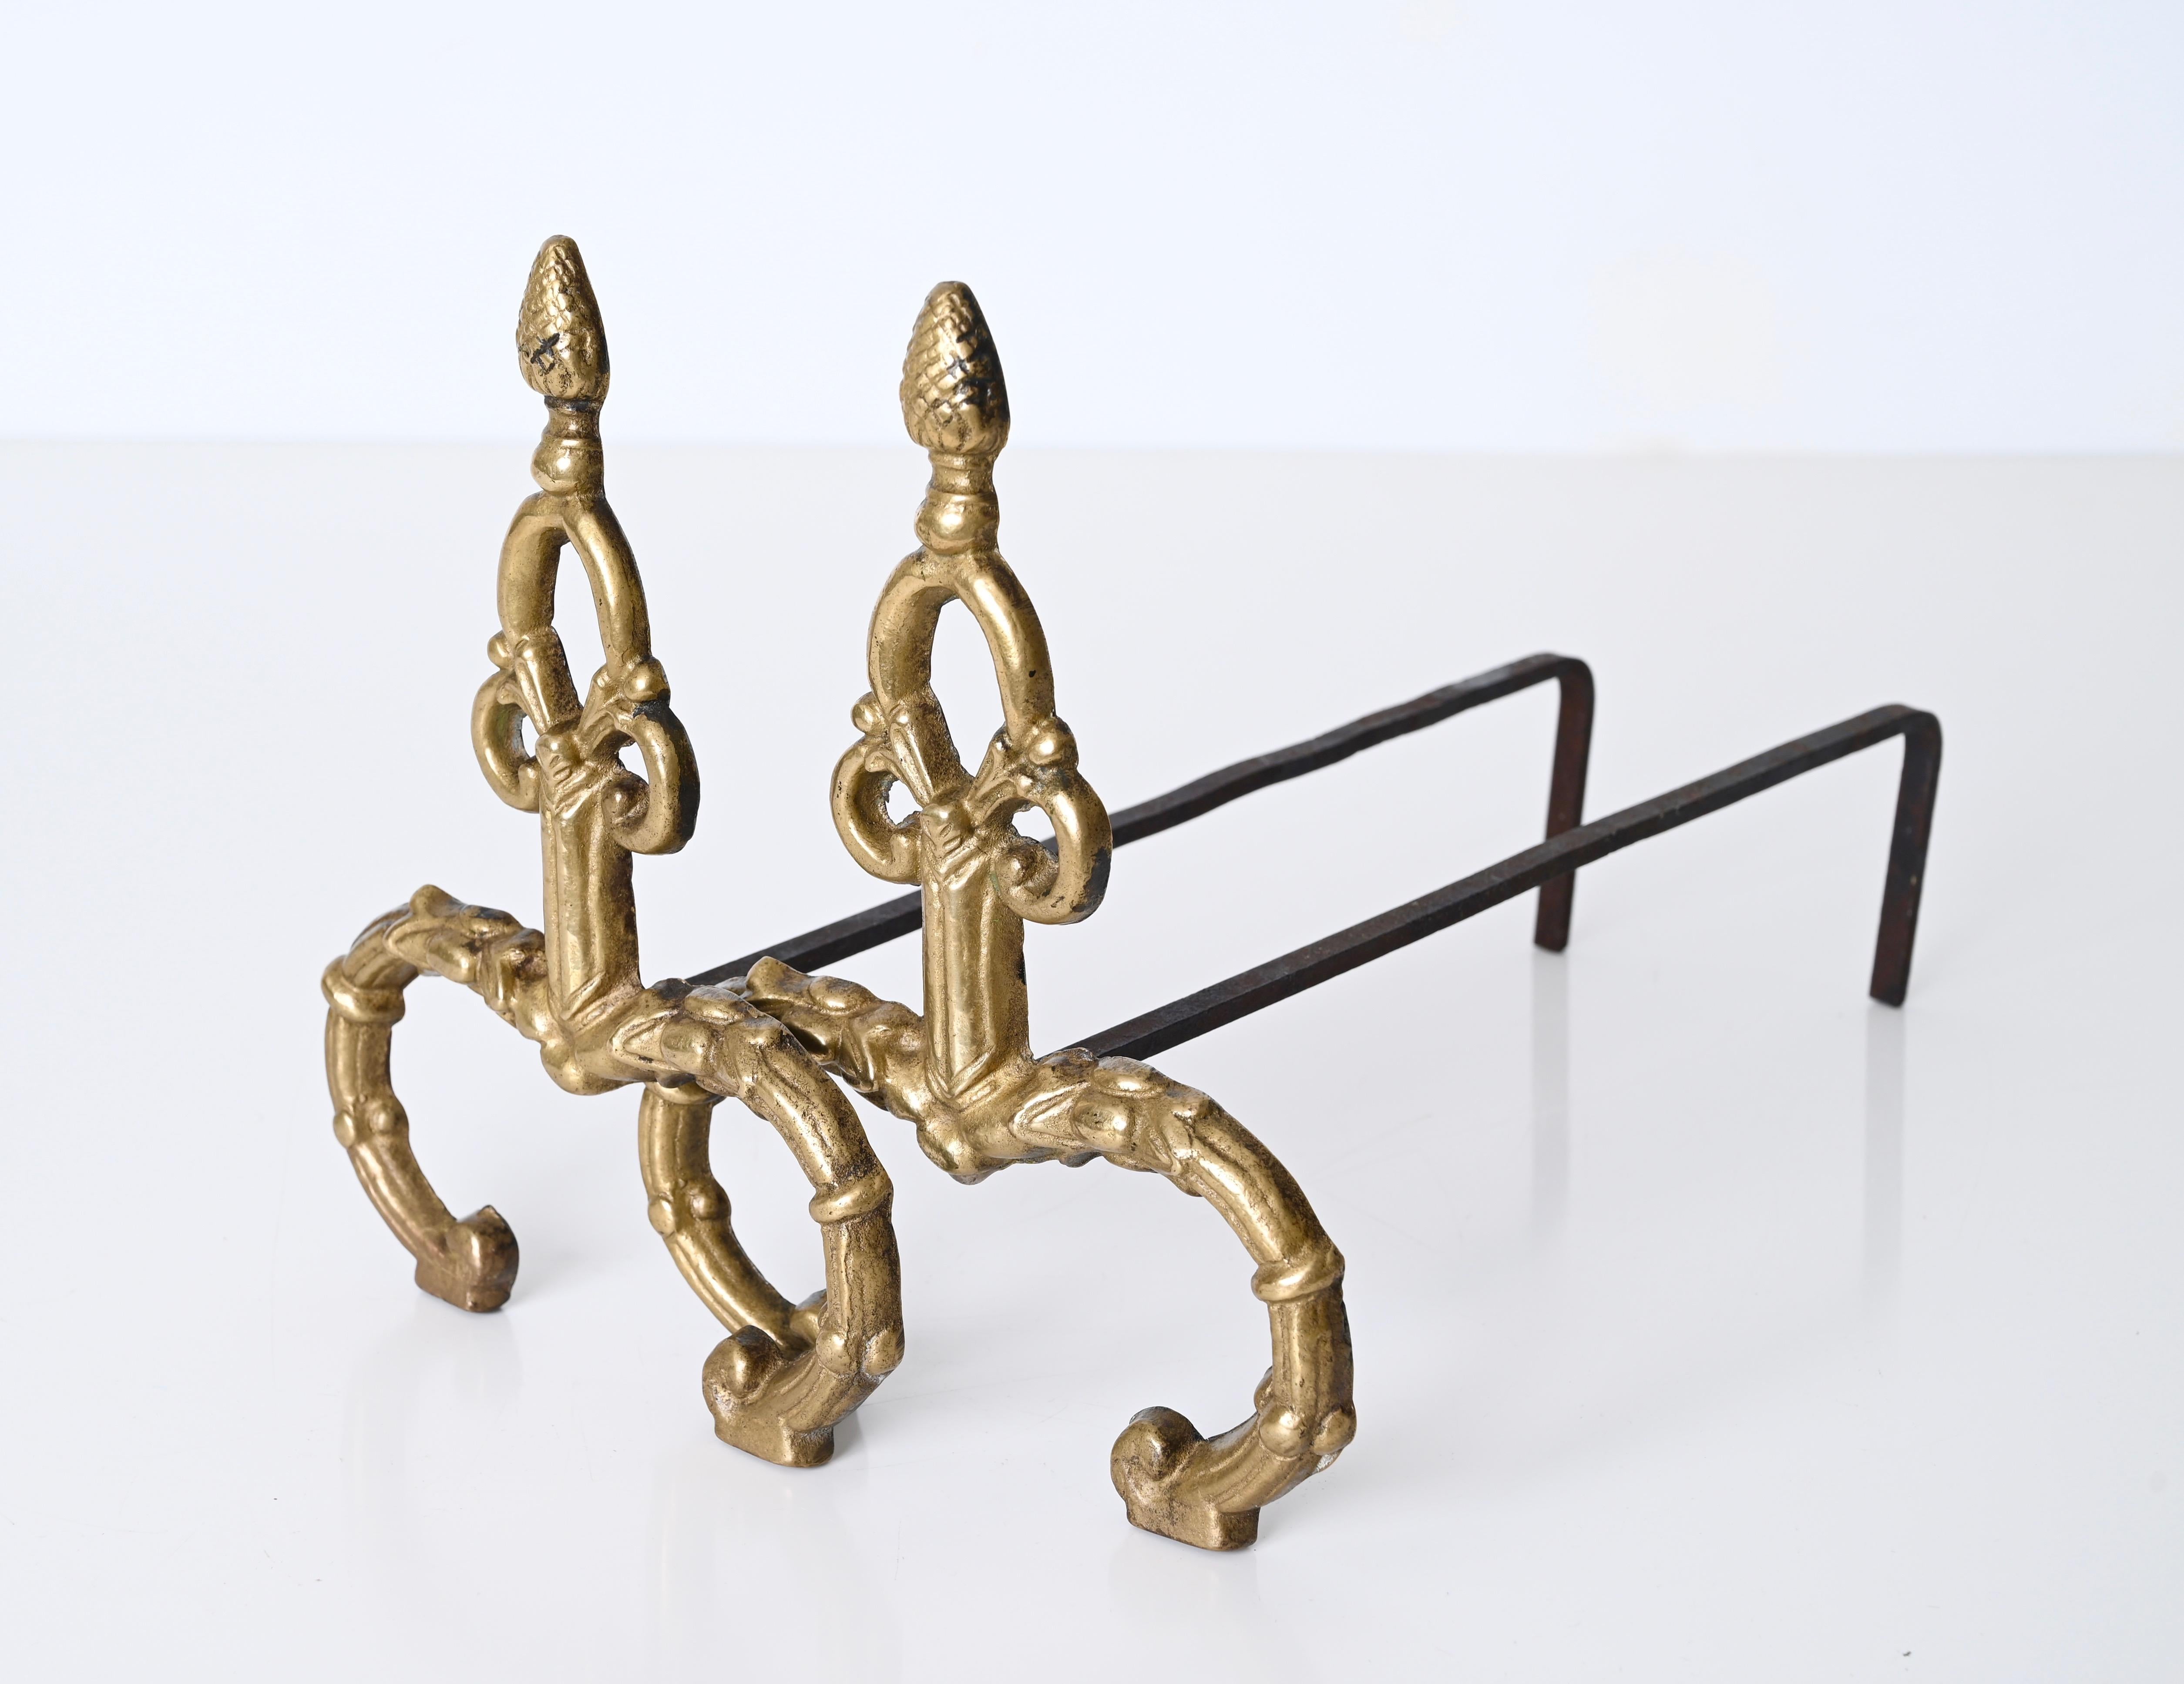 Precious pair of andirons in gilded bronze and forged iron in Louis XV style. These stunning firedogs were made in Italy in the 1940s.

The front of these andirons is made in forged gilt bronze with fantastic details, the top reproduce a pinecone